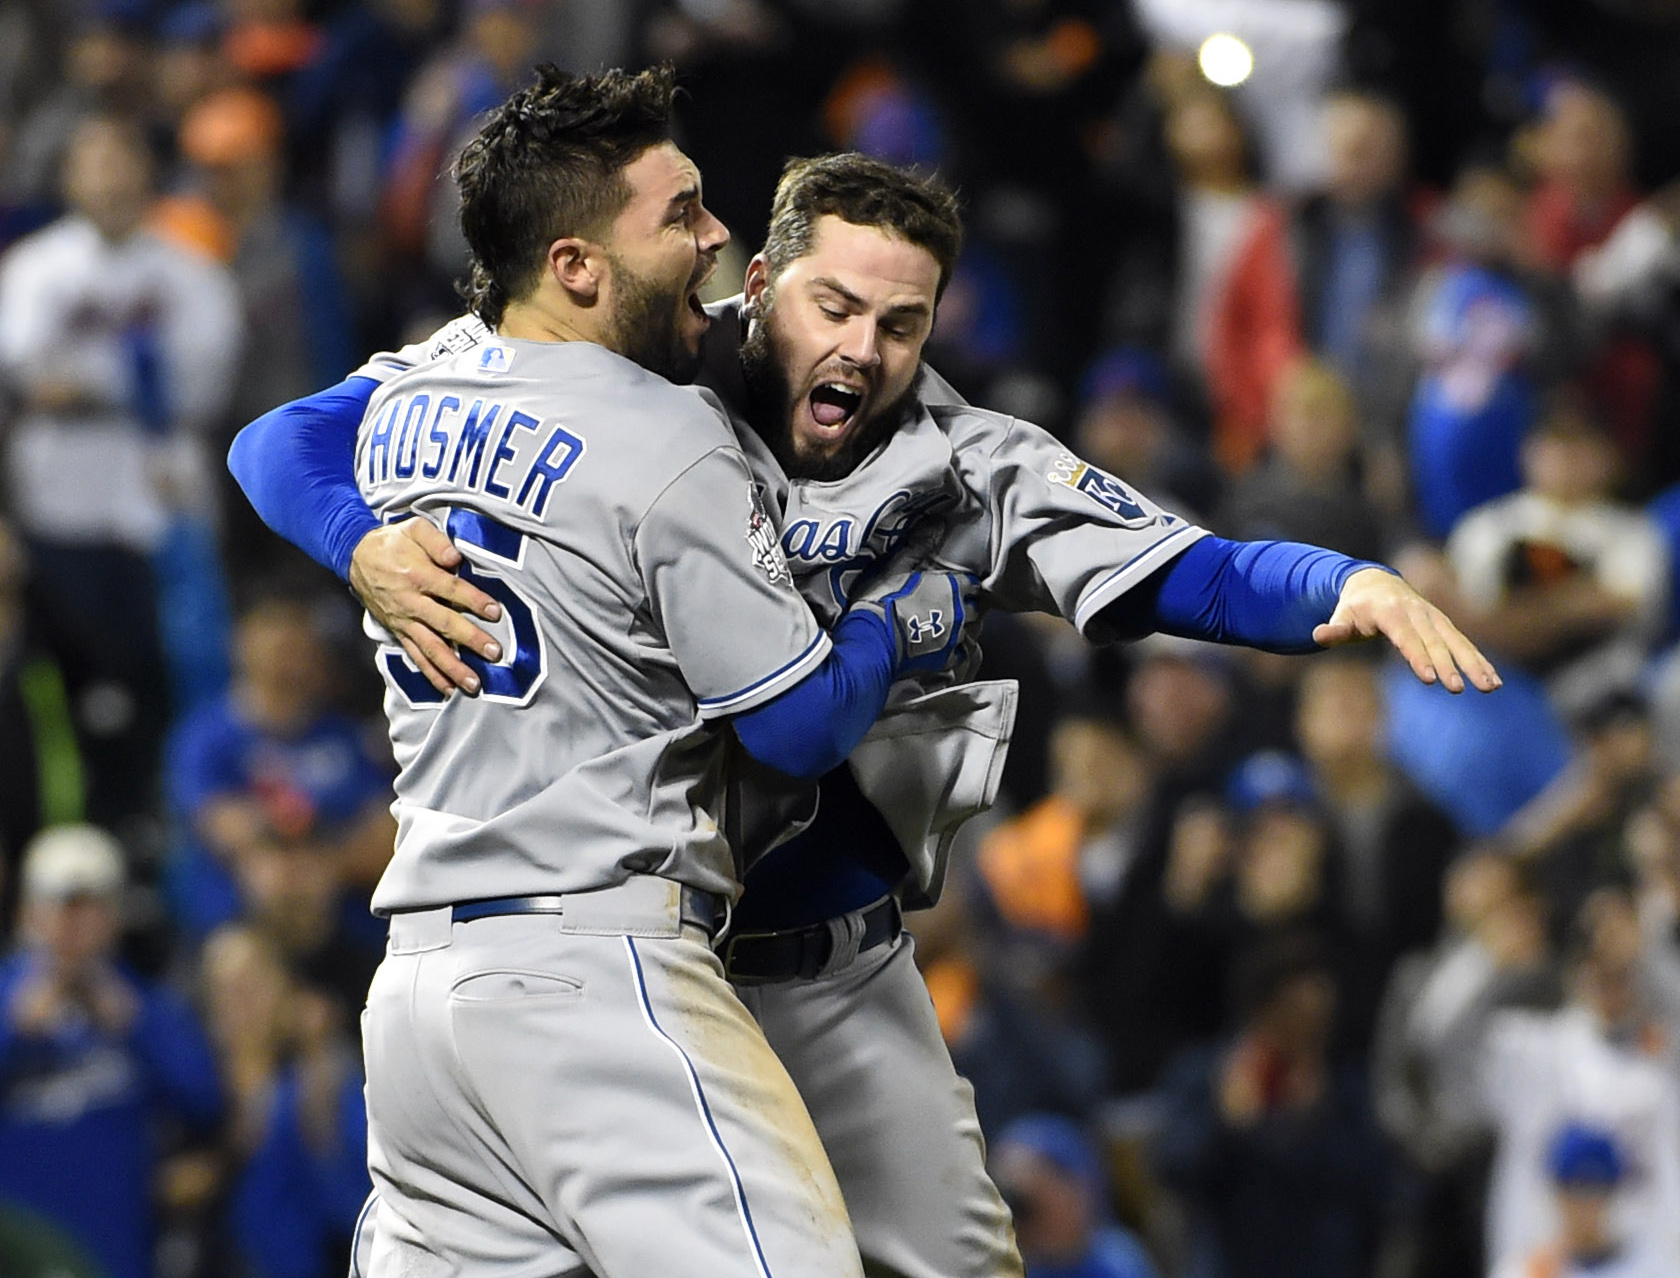 Photo: Royals' Eric Hosmer and his girlfriend celebrate after